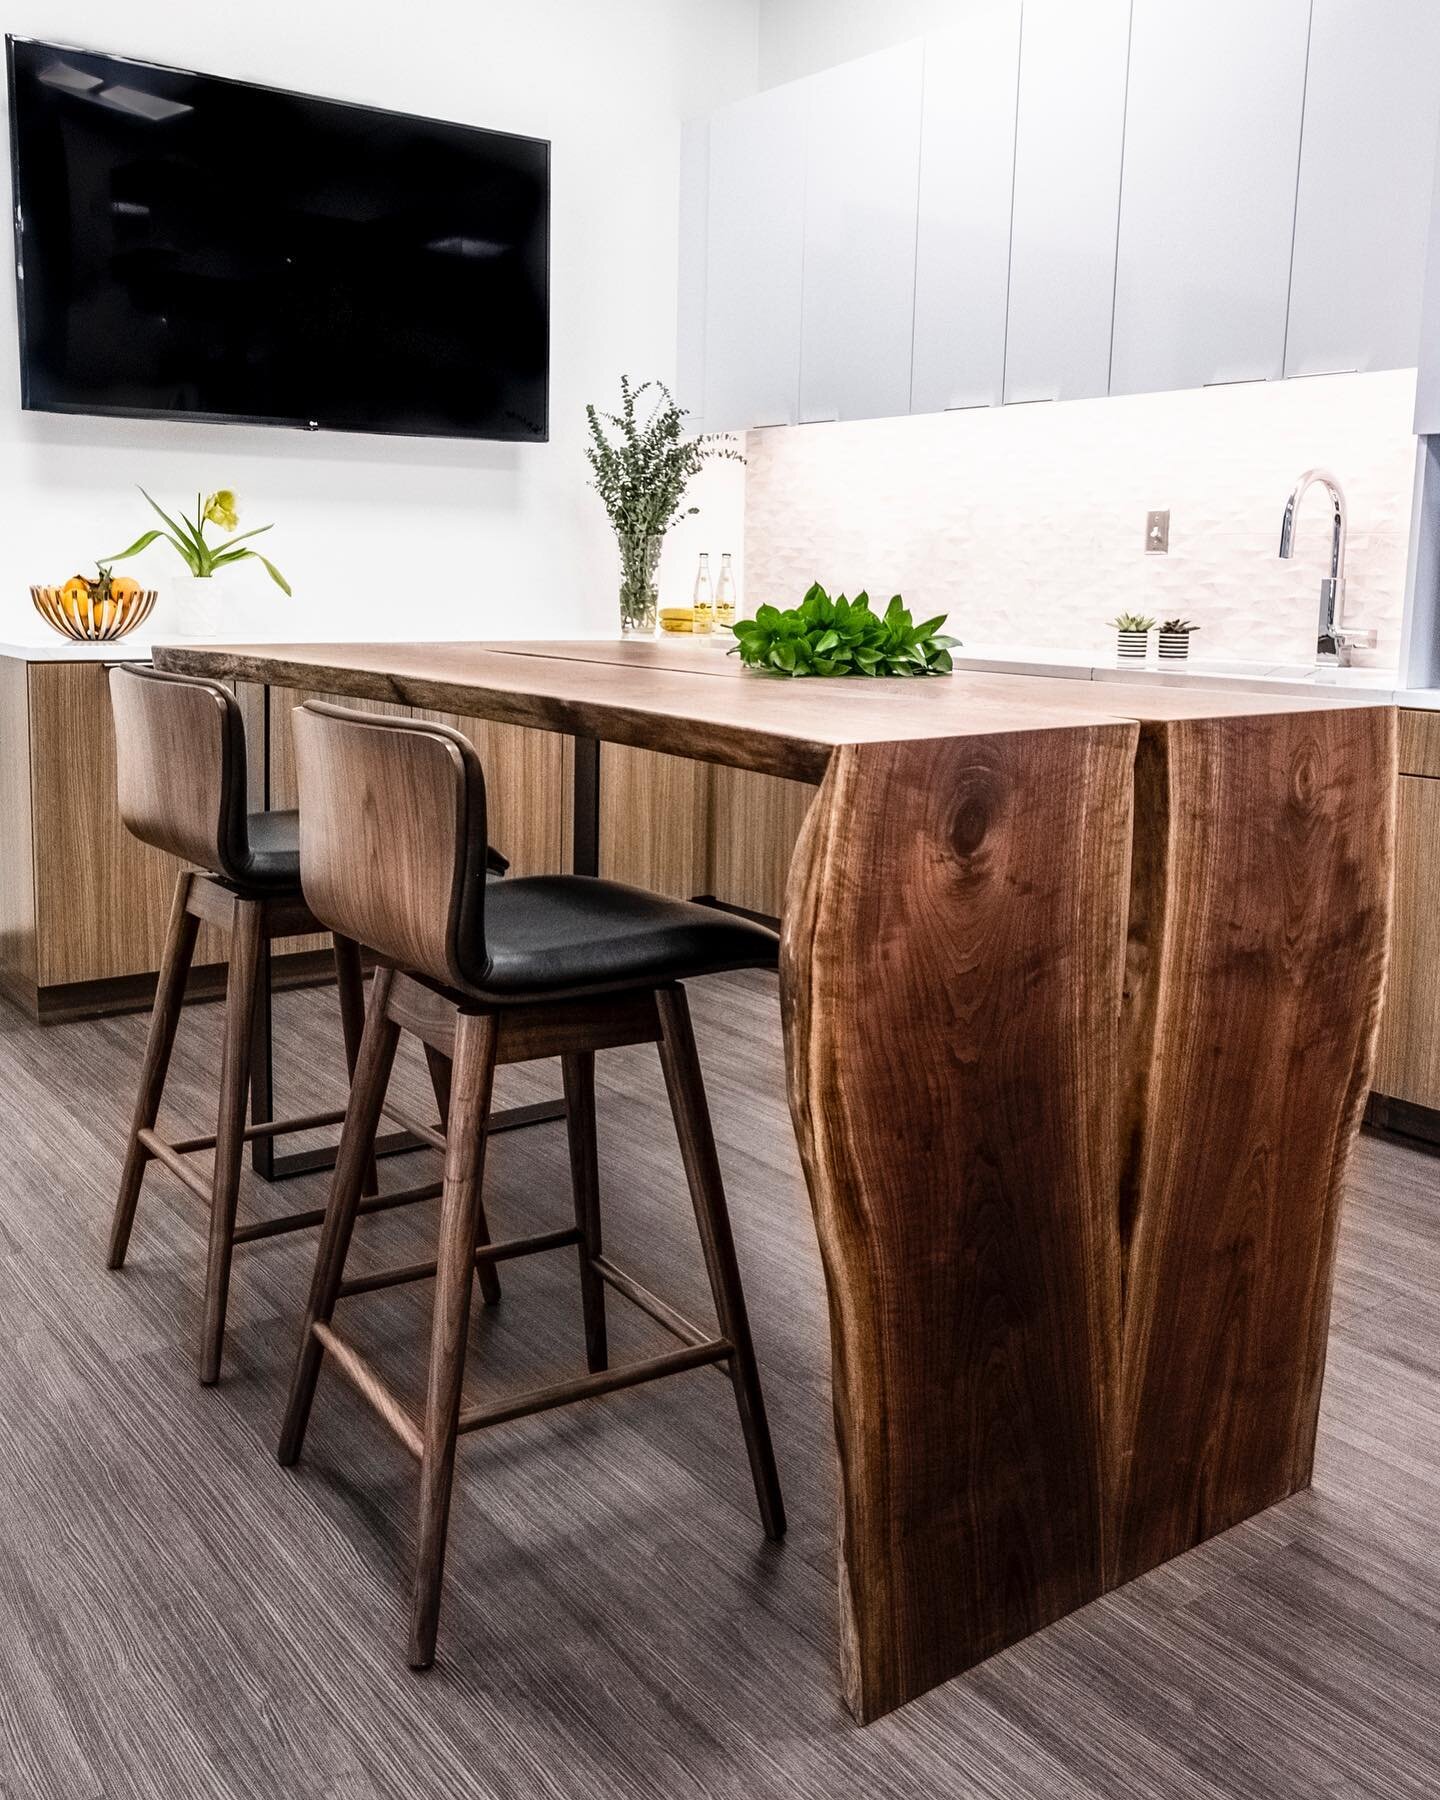 Finished Break Room at our Equity Firm project in Cherry Creek, thanks @revamptgoods for collaborating on this beautiful island and @wilsonart @formicagroup @pentalquartz @article 📸 by @brettfoxstudio #commercialdesign #interiordesign #denverinterio